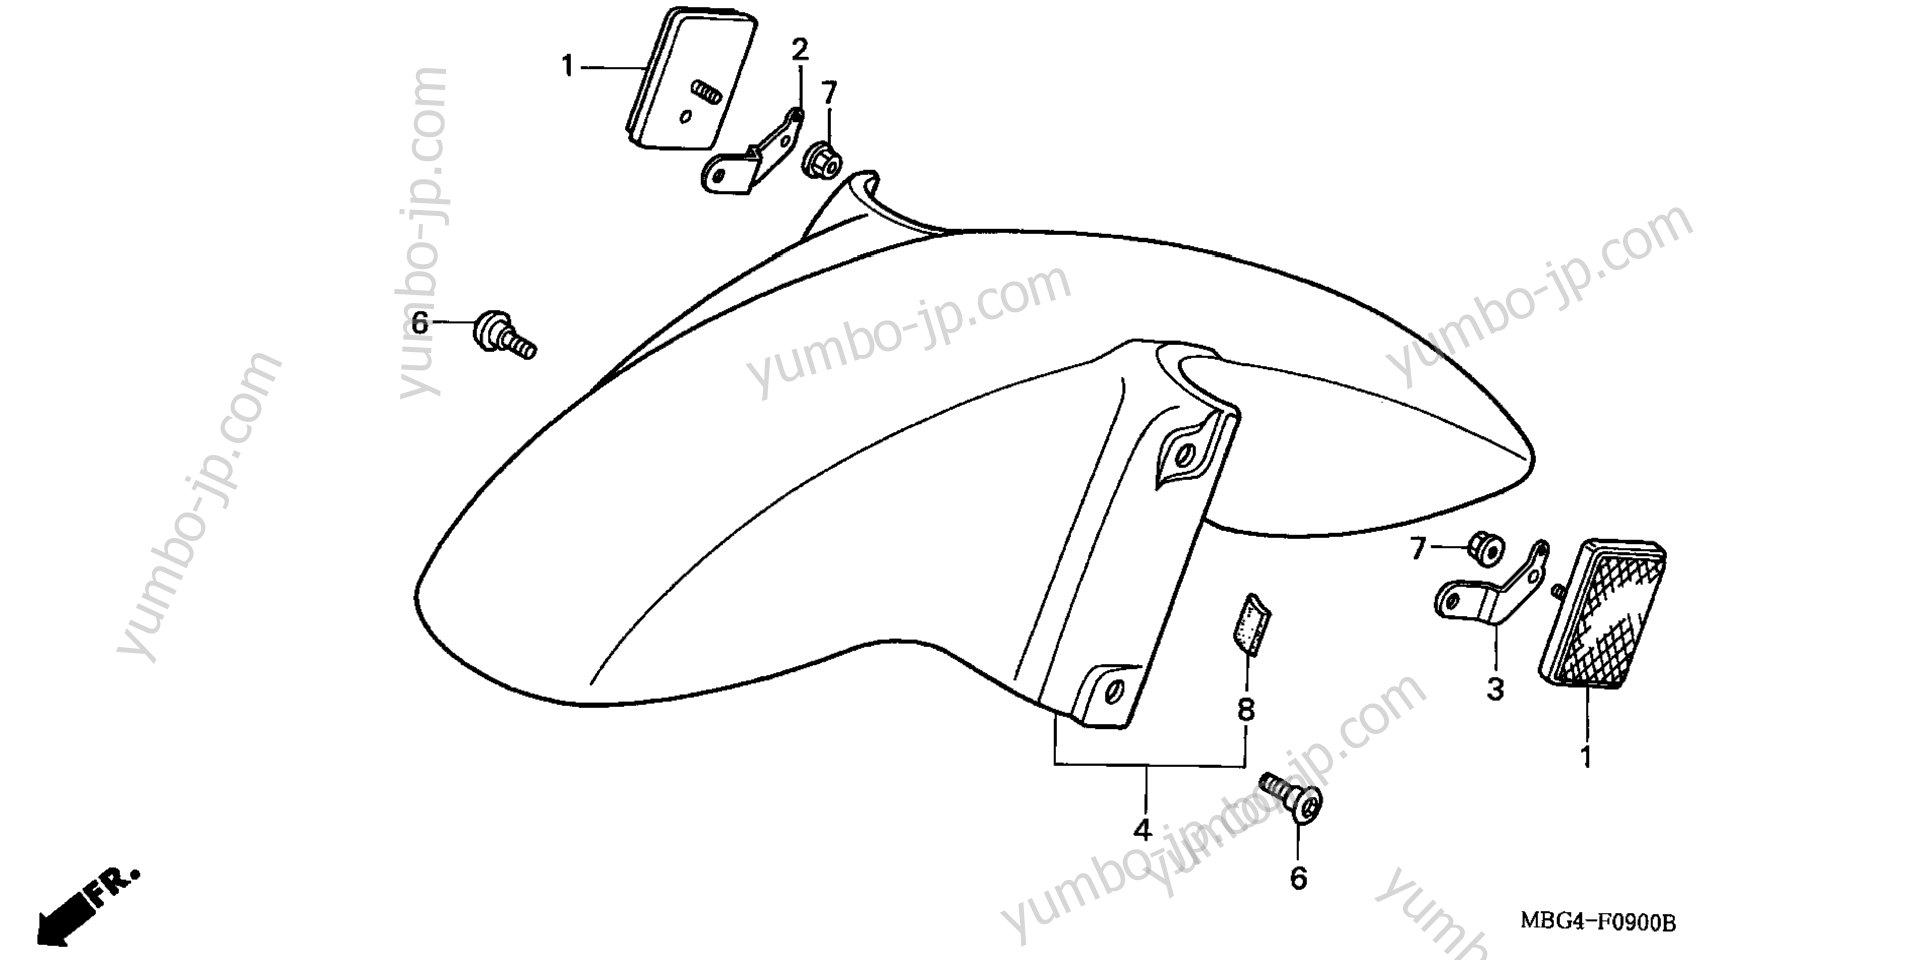 FRONT FENDER for motorcycles HONDA VFR800FI AC 1998 year